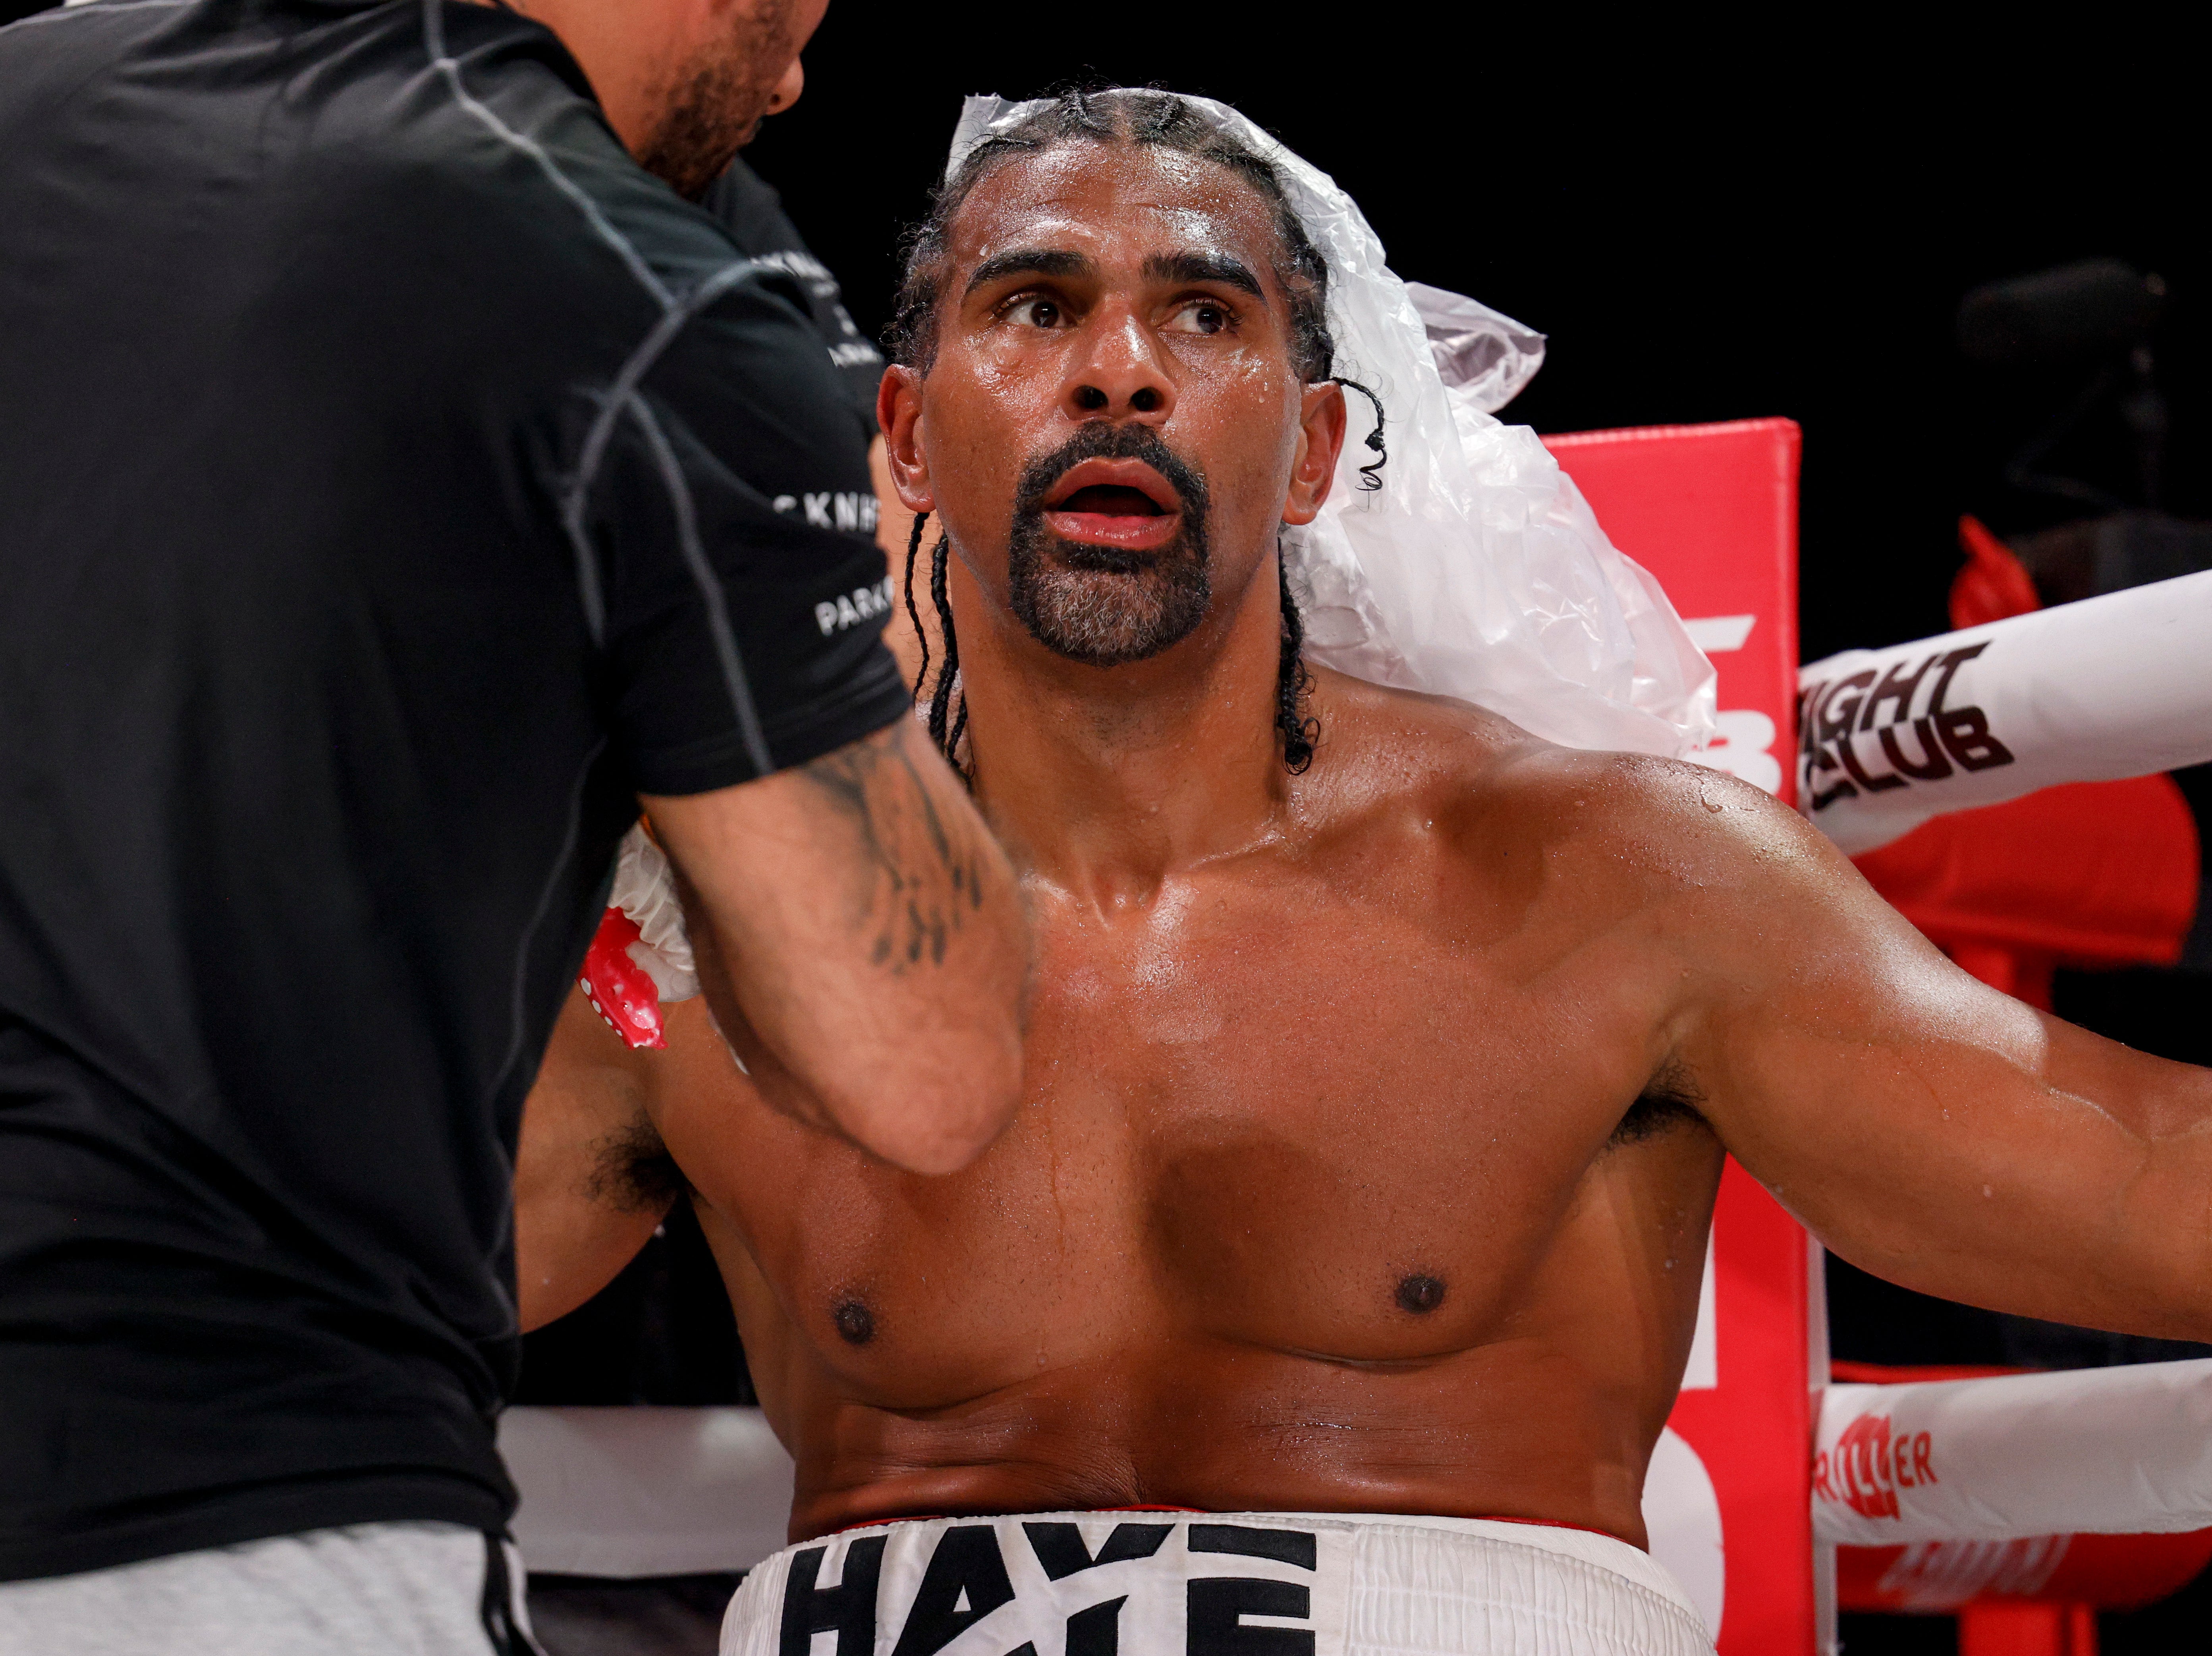 Haye denies the charge and is on trial